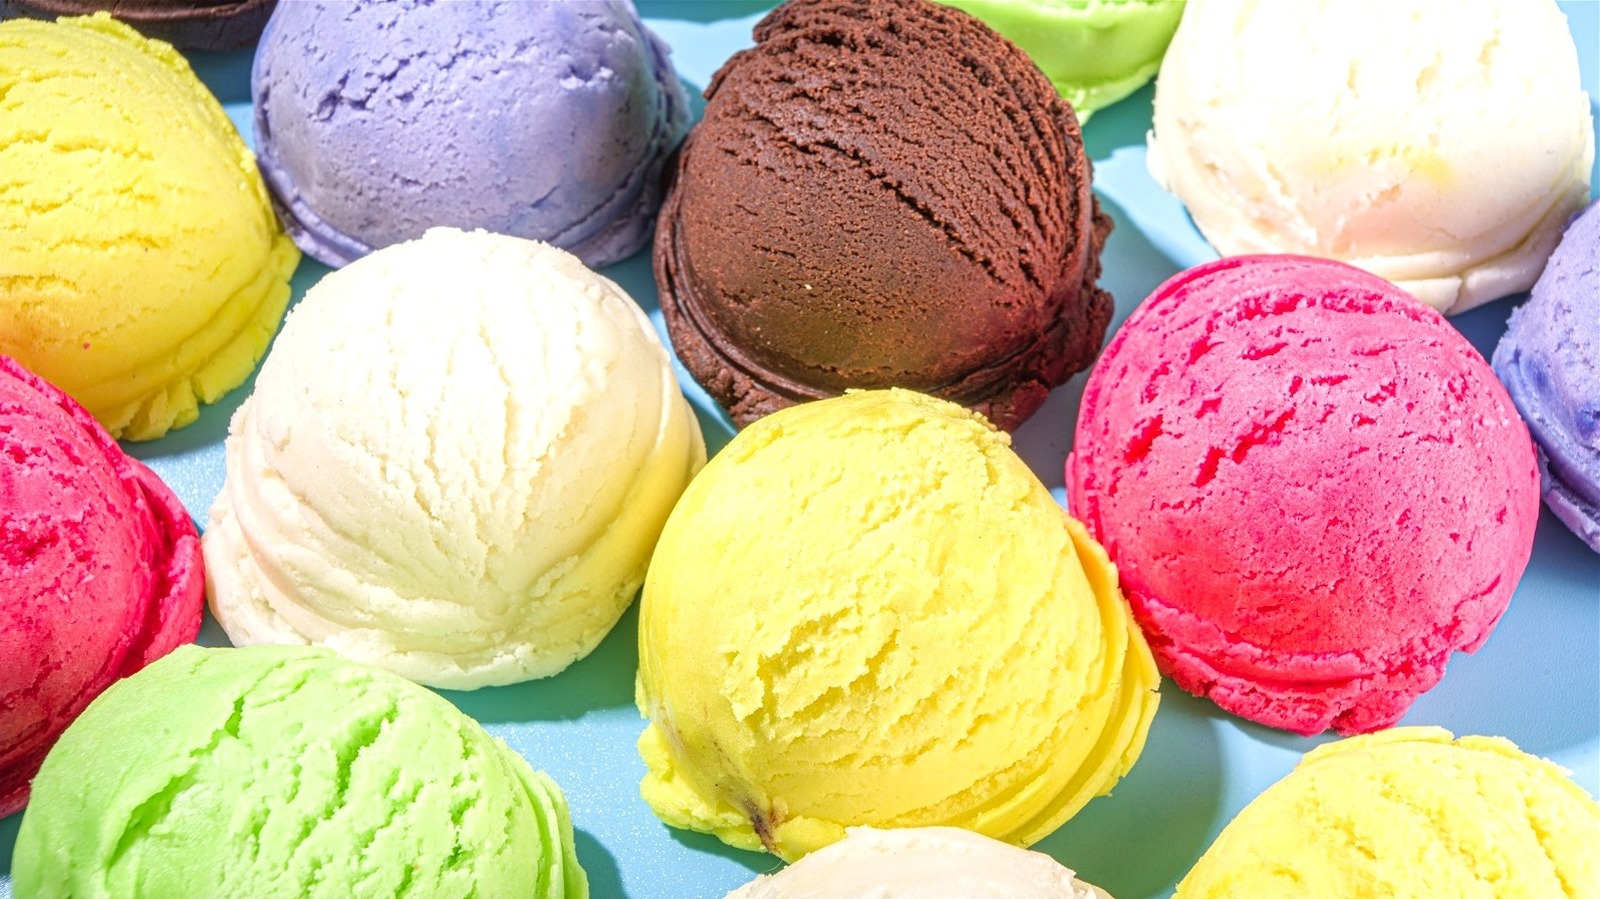 Ice cream: the science behind the frosty treat